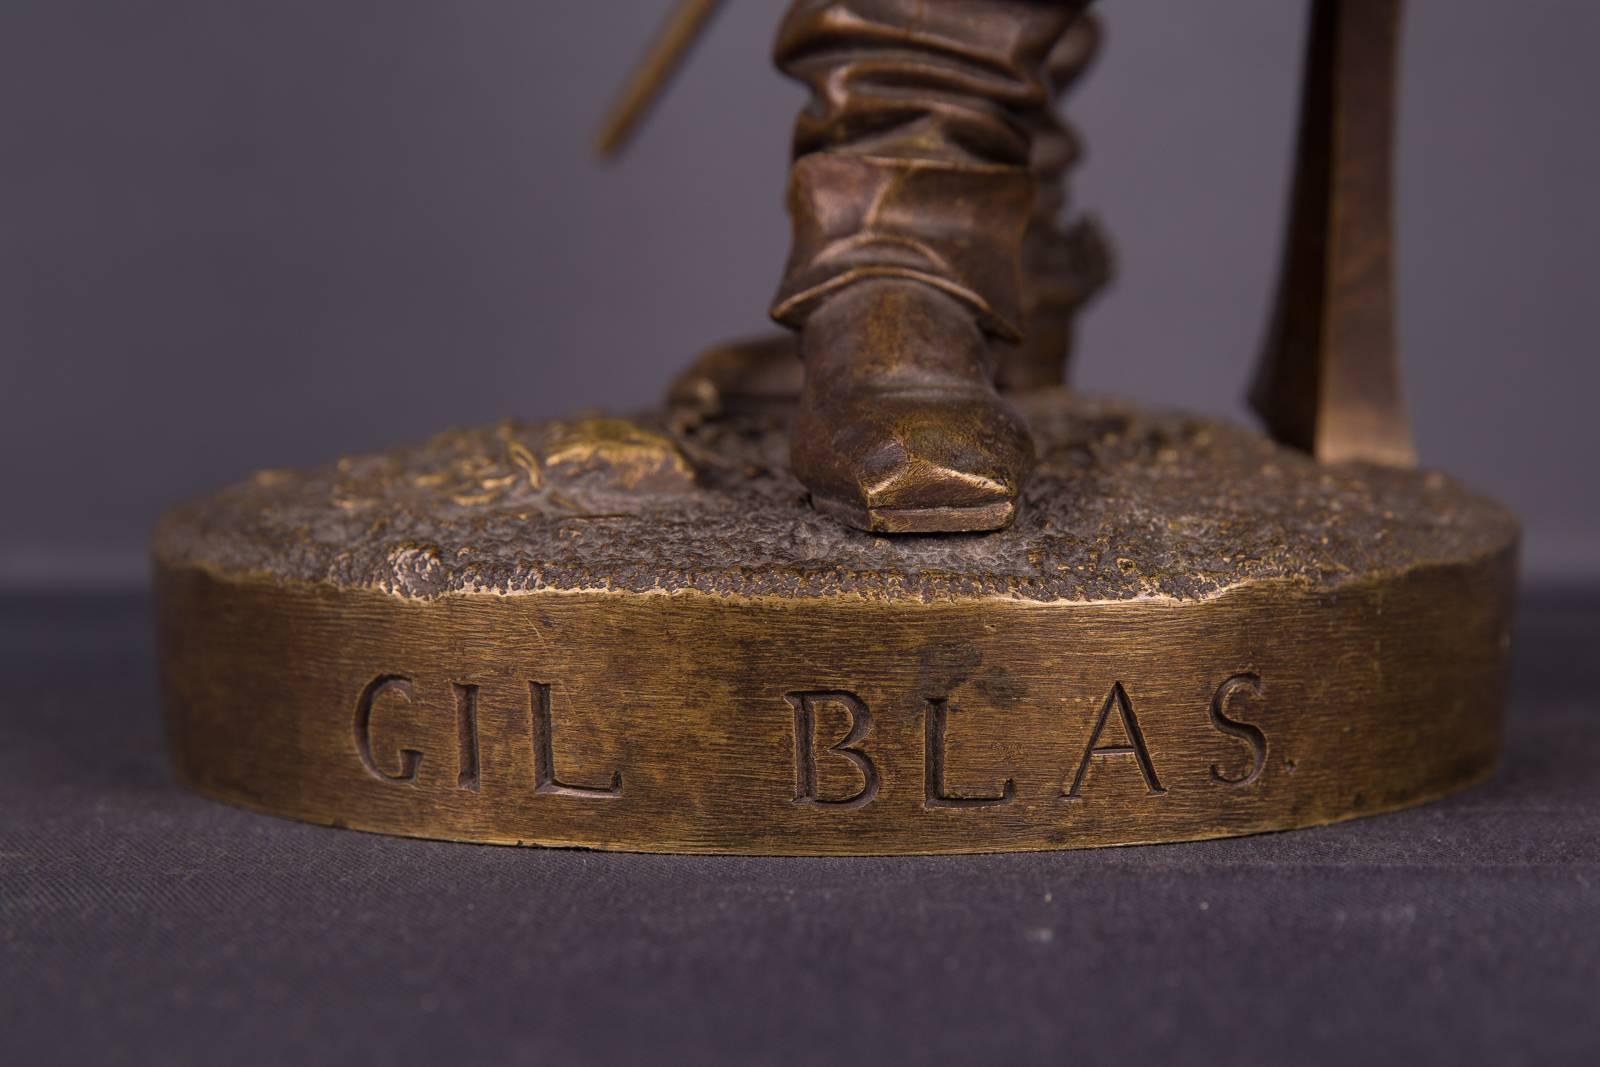 19th Century, Bronze Sculpture Gil Blas Signed by Leveque For Sale 5